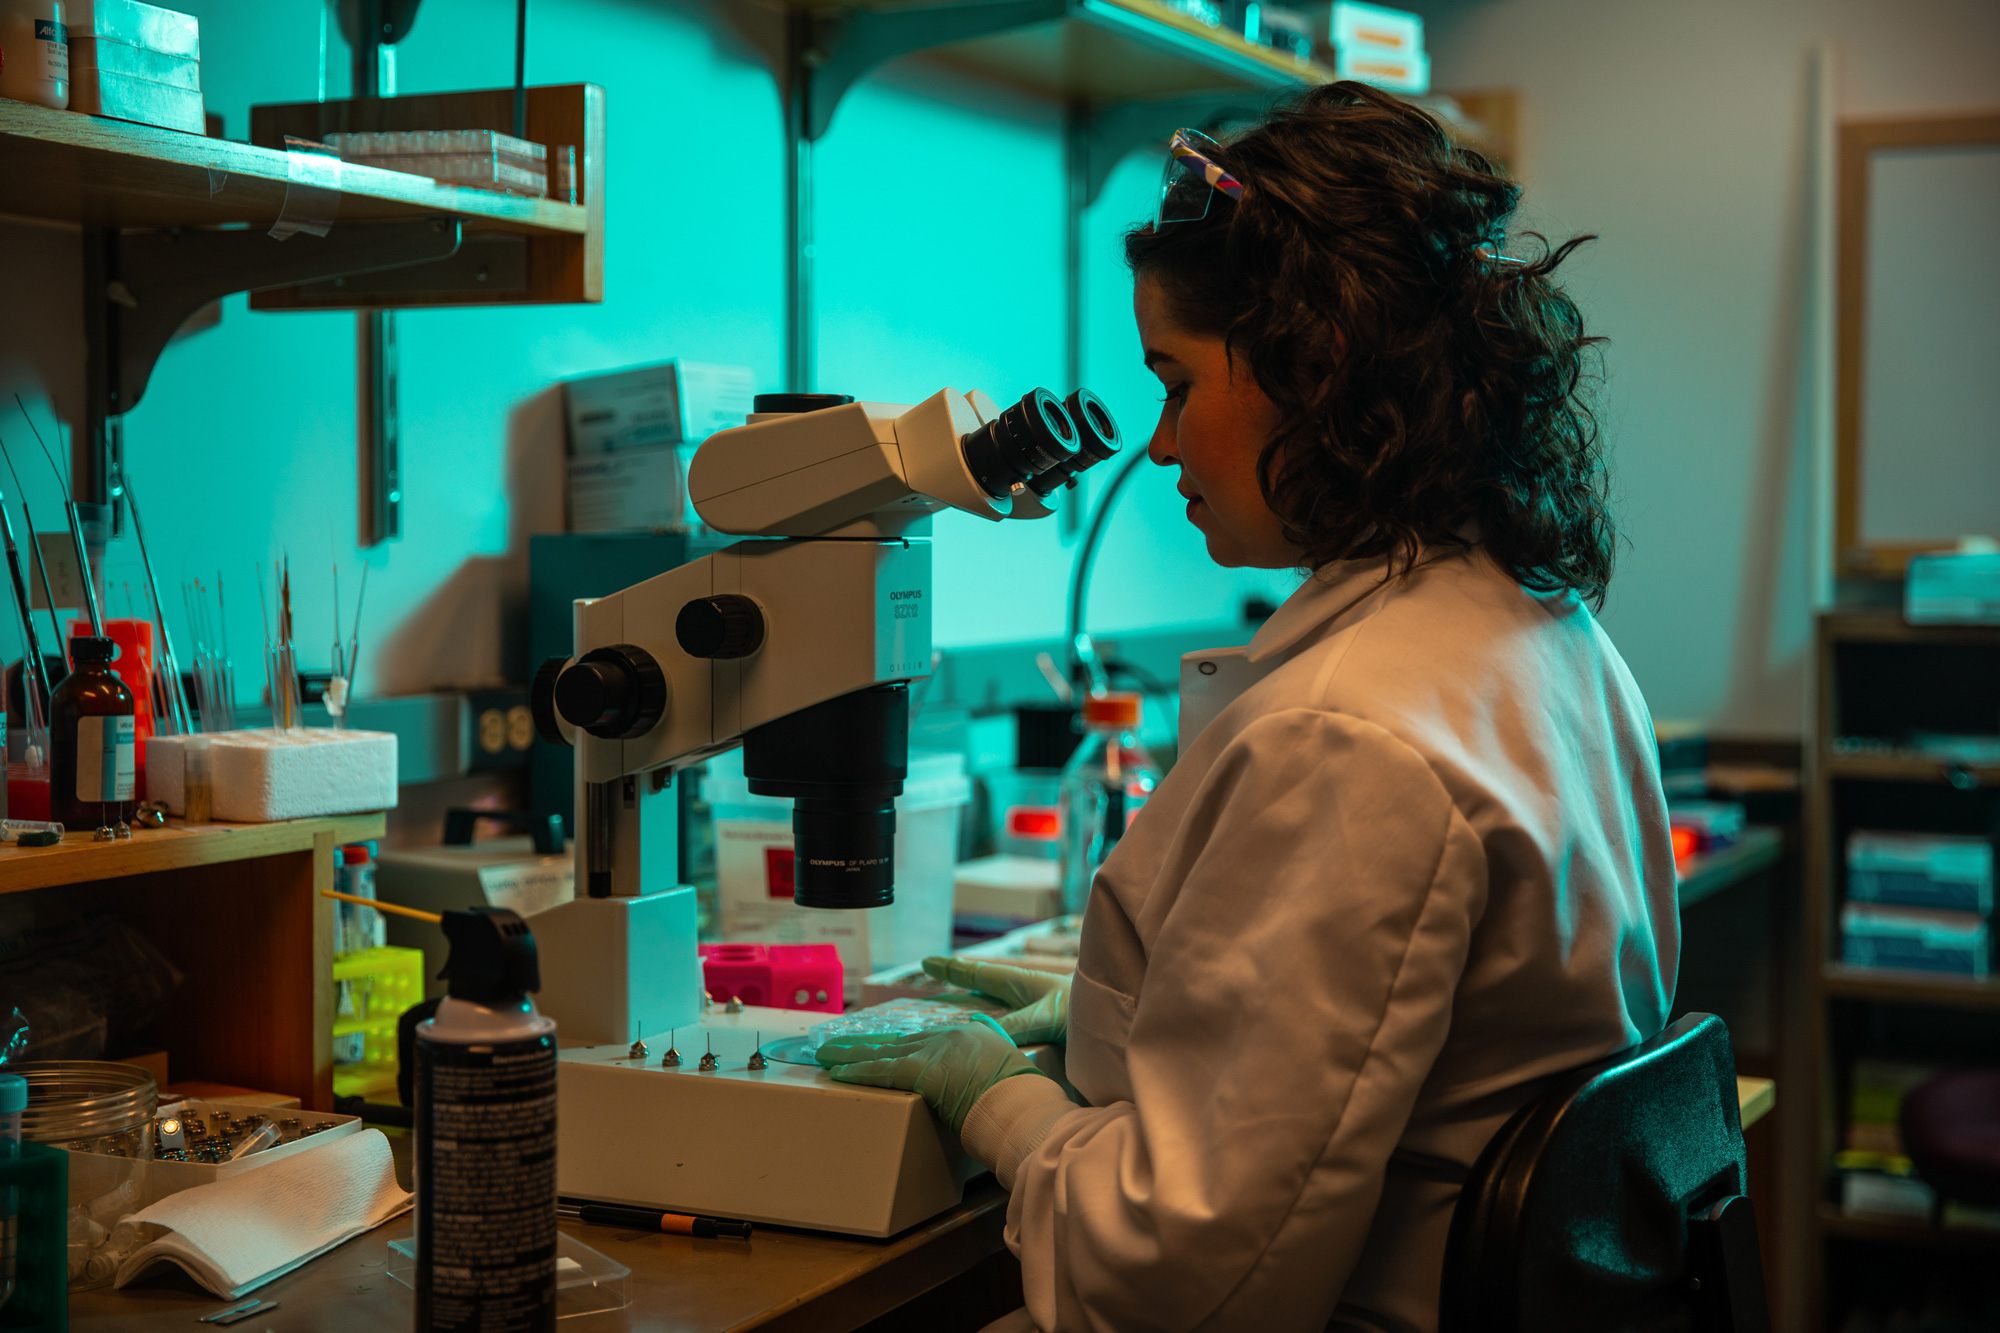 A woman in a lab coat looks into a microscope.